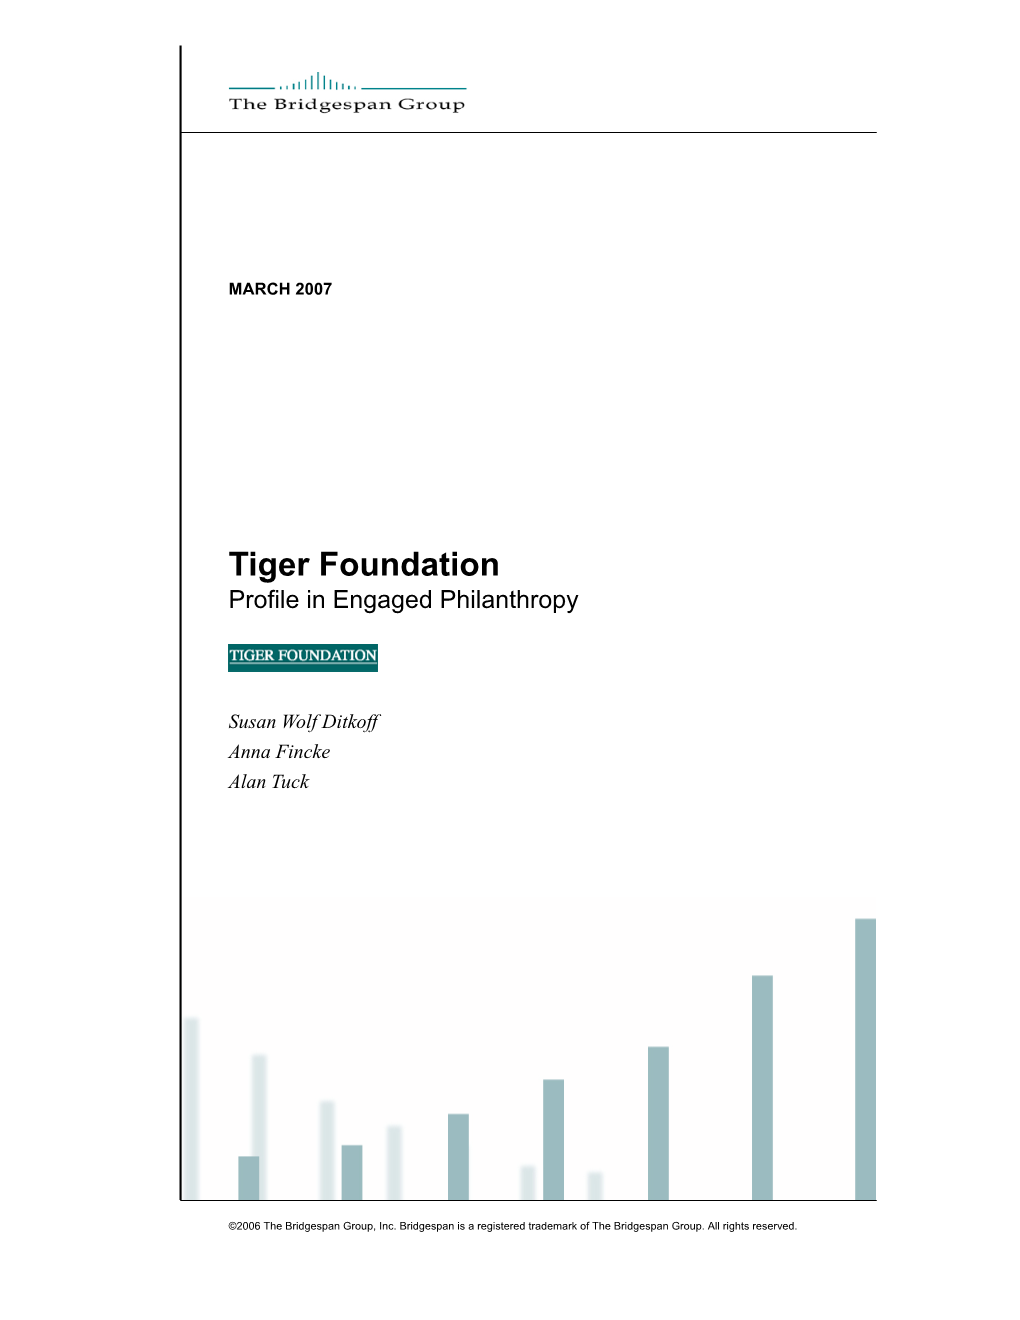 Tiger Foundation Profile in Engaged Philanthropy